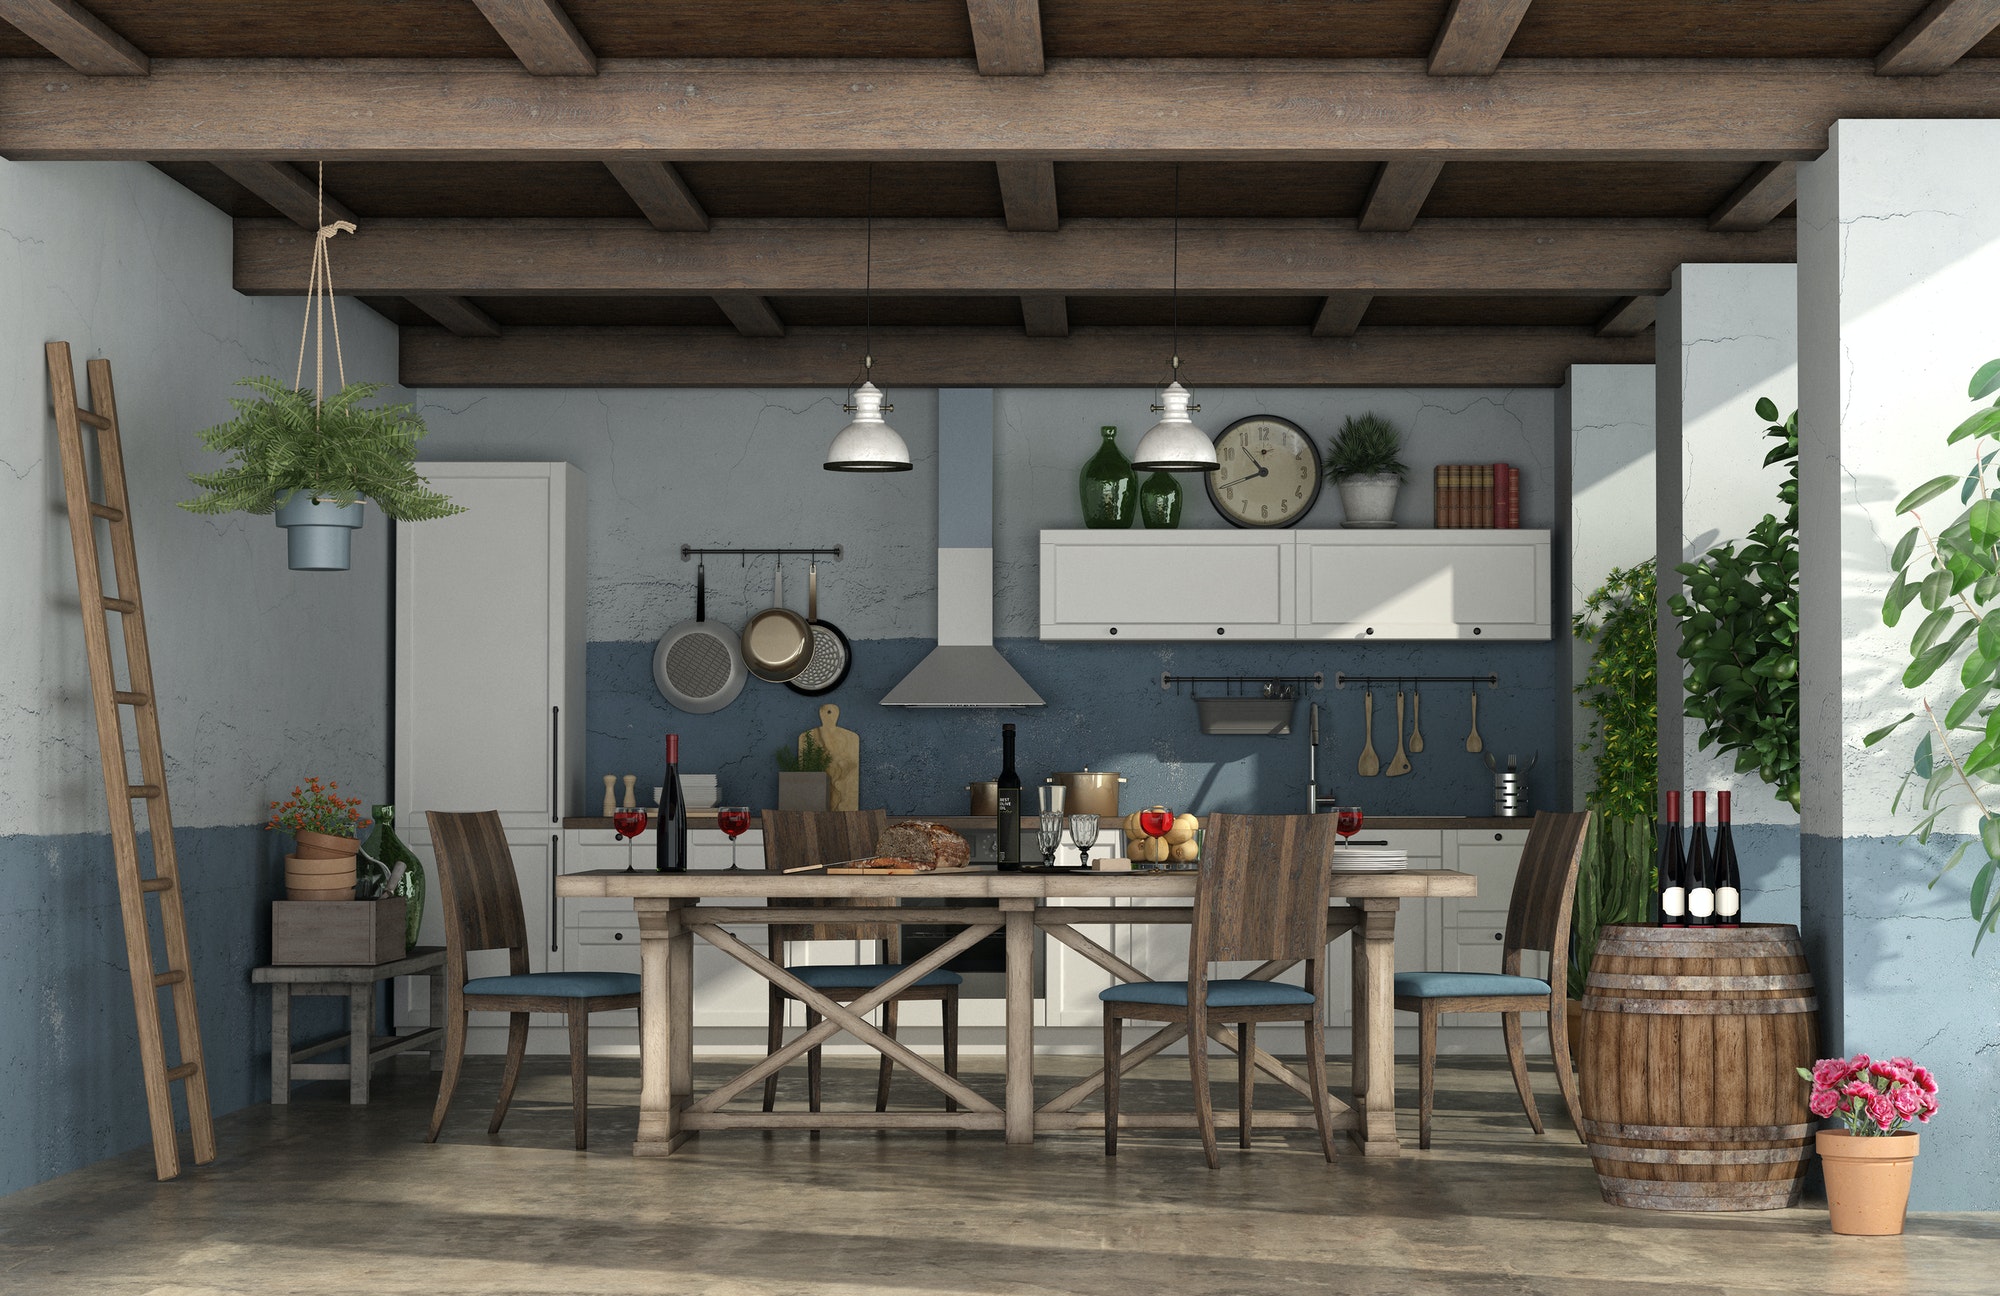 Old veranda with kitchen in rustic style